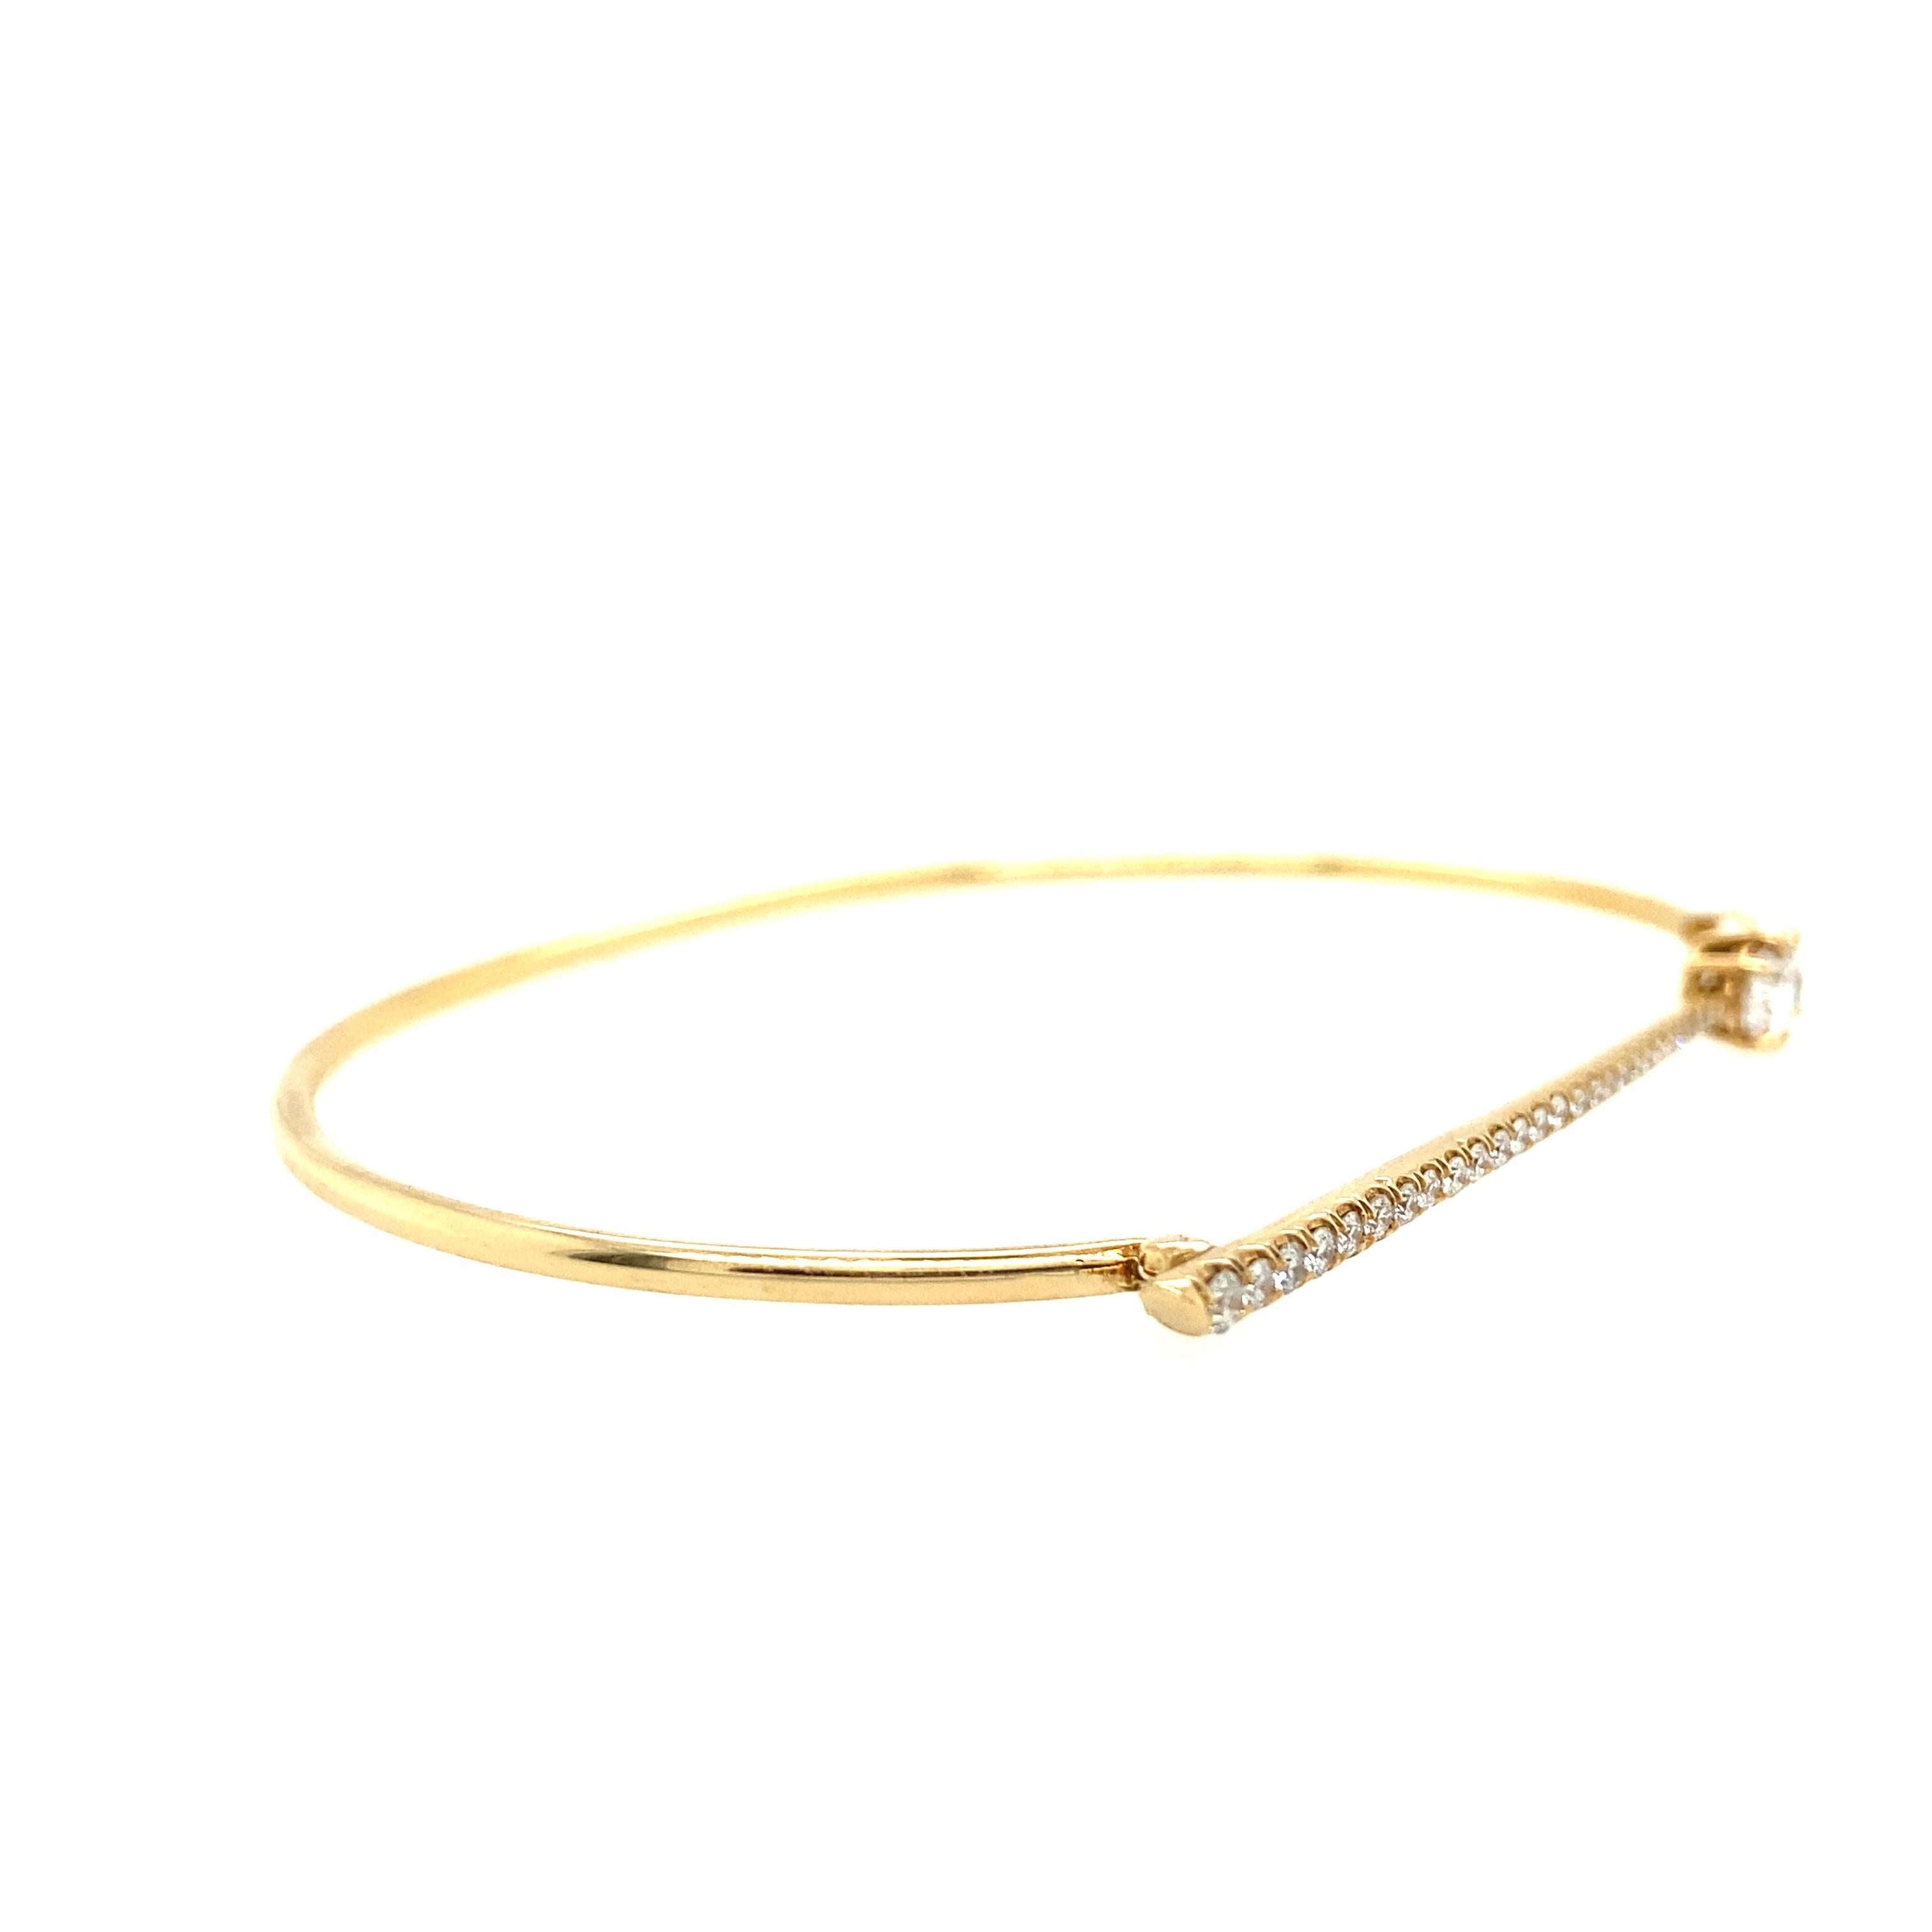 Modern and sleek, this 18k yellow gold and diamond bar bangle is the epitome of designer Jade Trau's pieces. Every piece of Jade Trau jewelry is handmade in New York City to exacting standards and features 0.61tcw of ethically sourced H color and